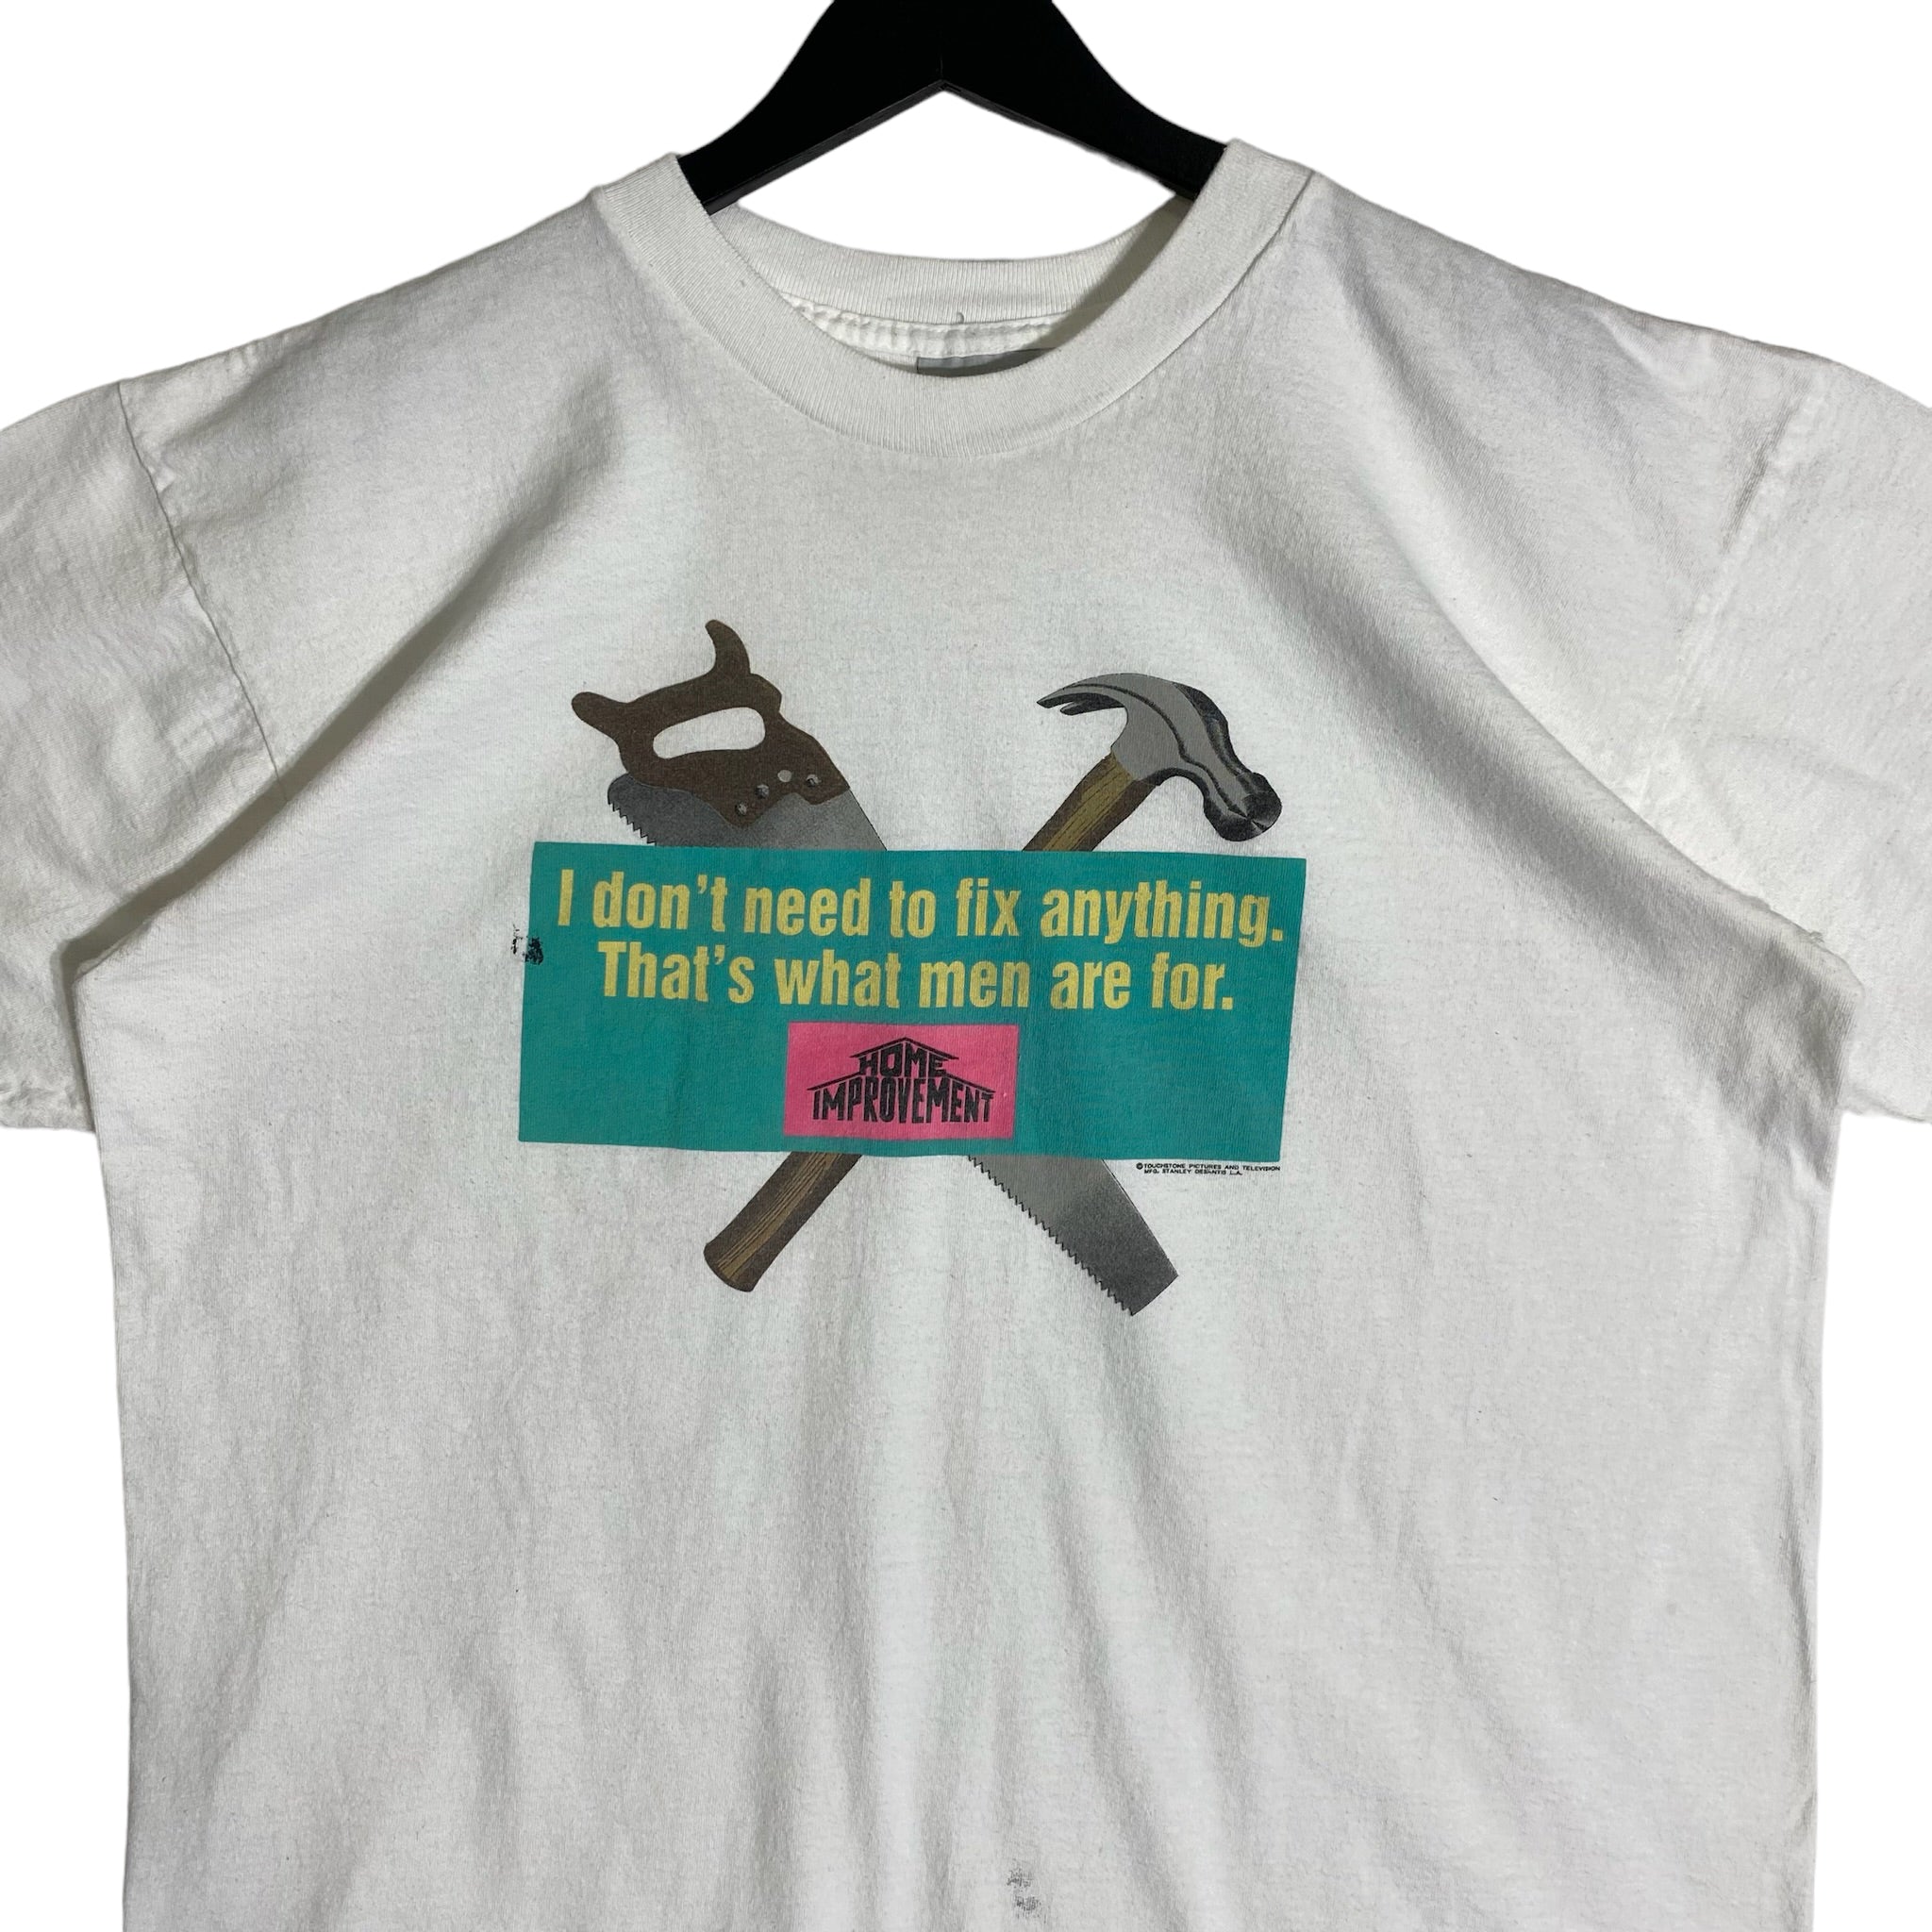 Vintage Home Improvement "I Don't Need To Fix Anything' Tee 1994